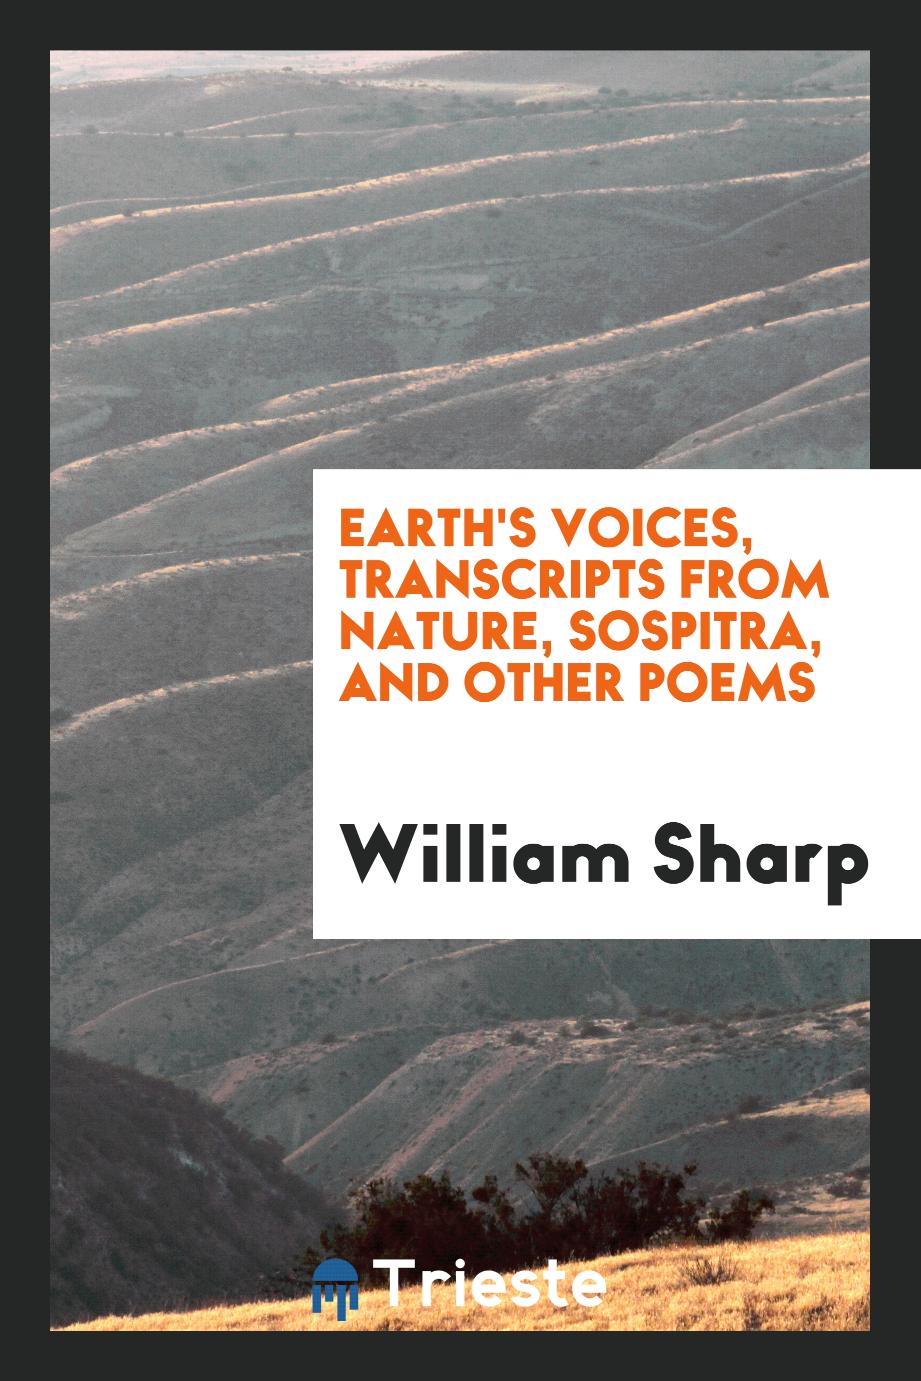 Earth's Voices, Transcripts from Nature, Sospitra, and Other Poems